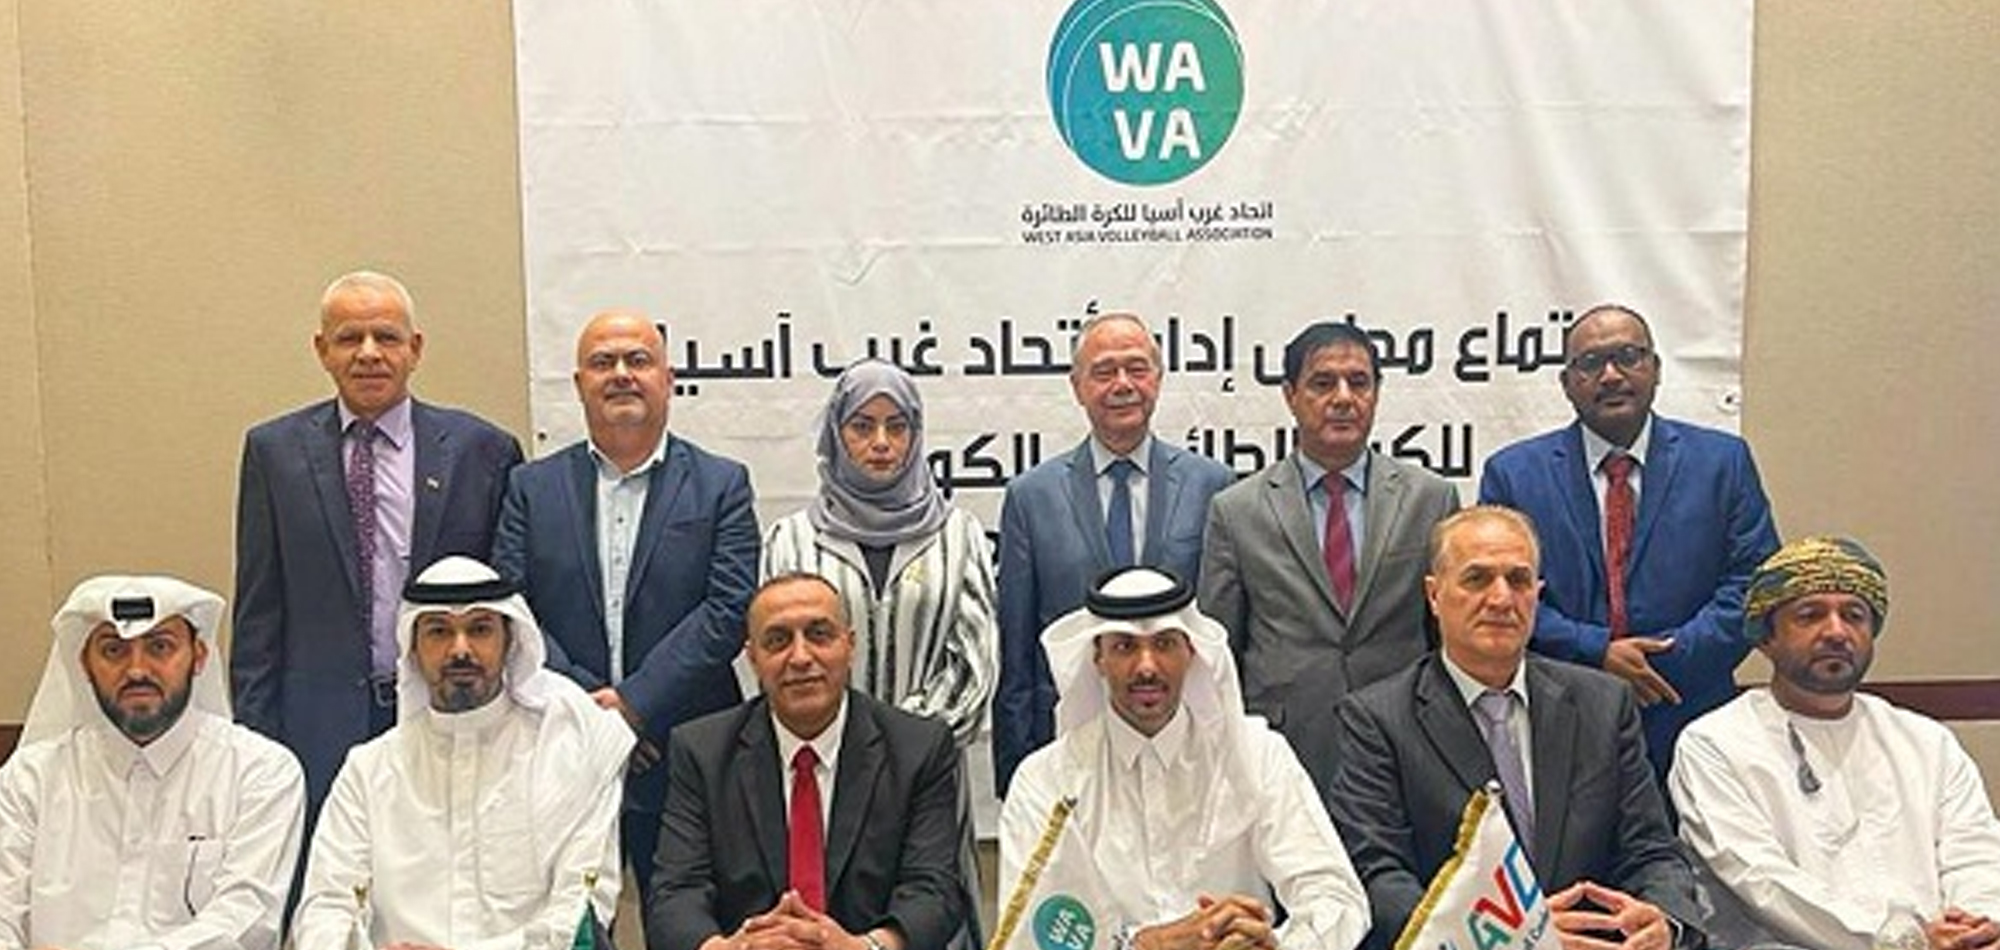 AL KUWARI CHAIRS WEST ASIAN VOLLEYBALL FEDERATION MEETING IN KUWAIT